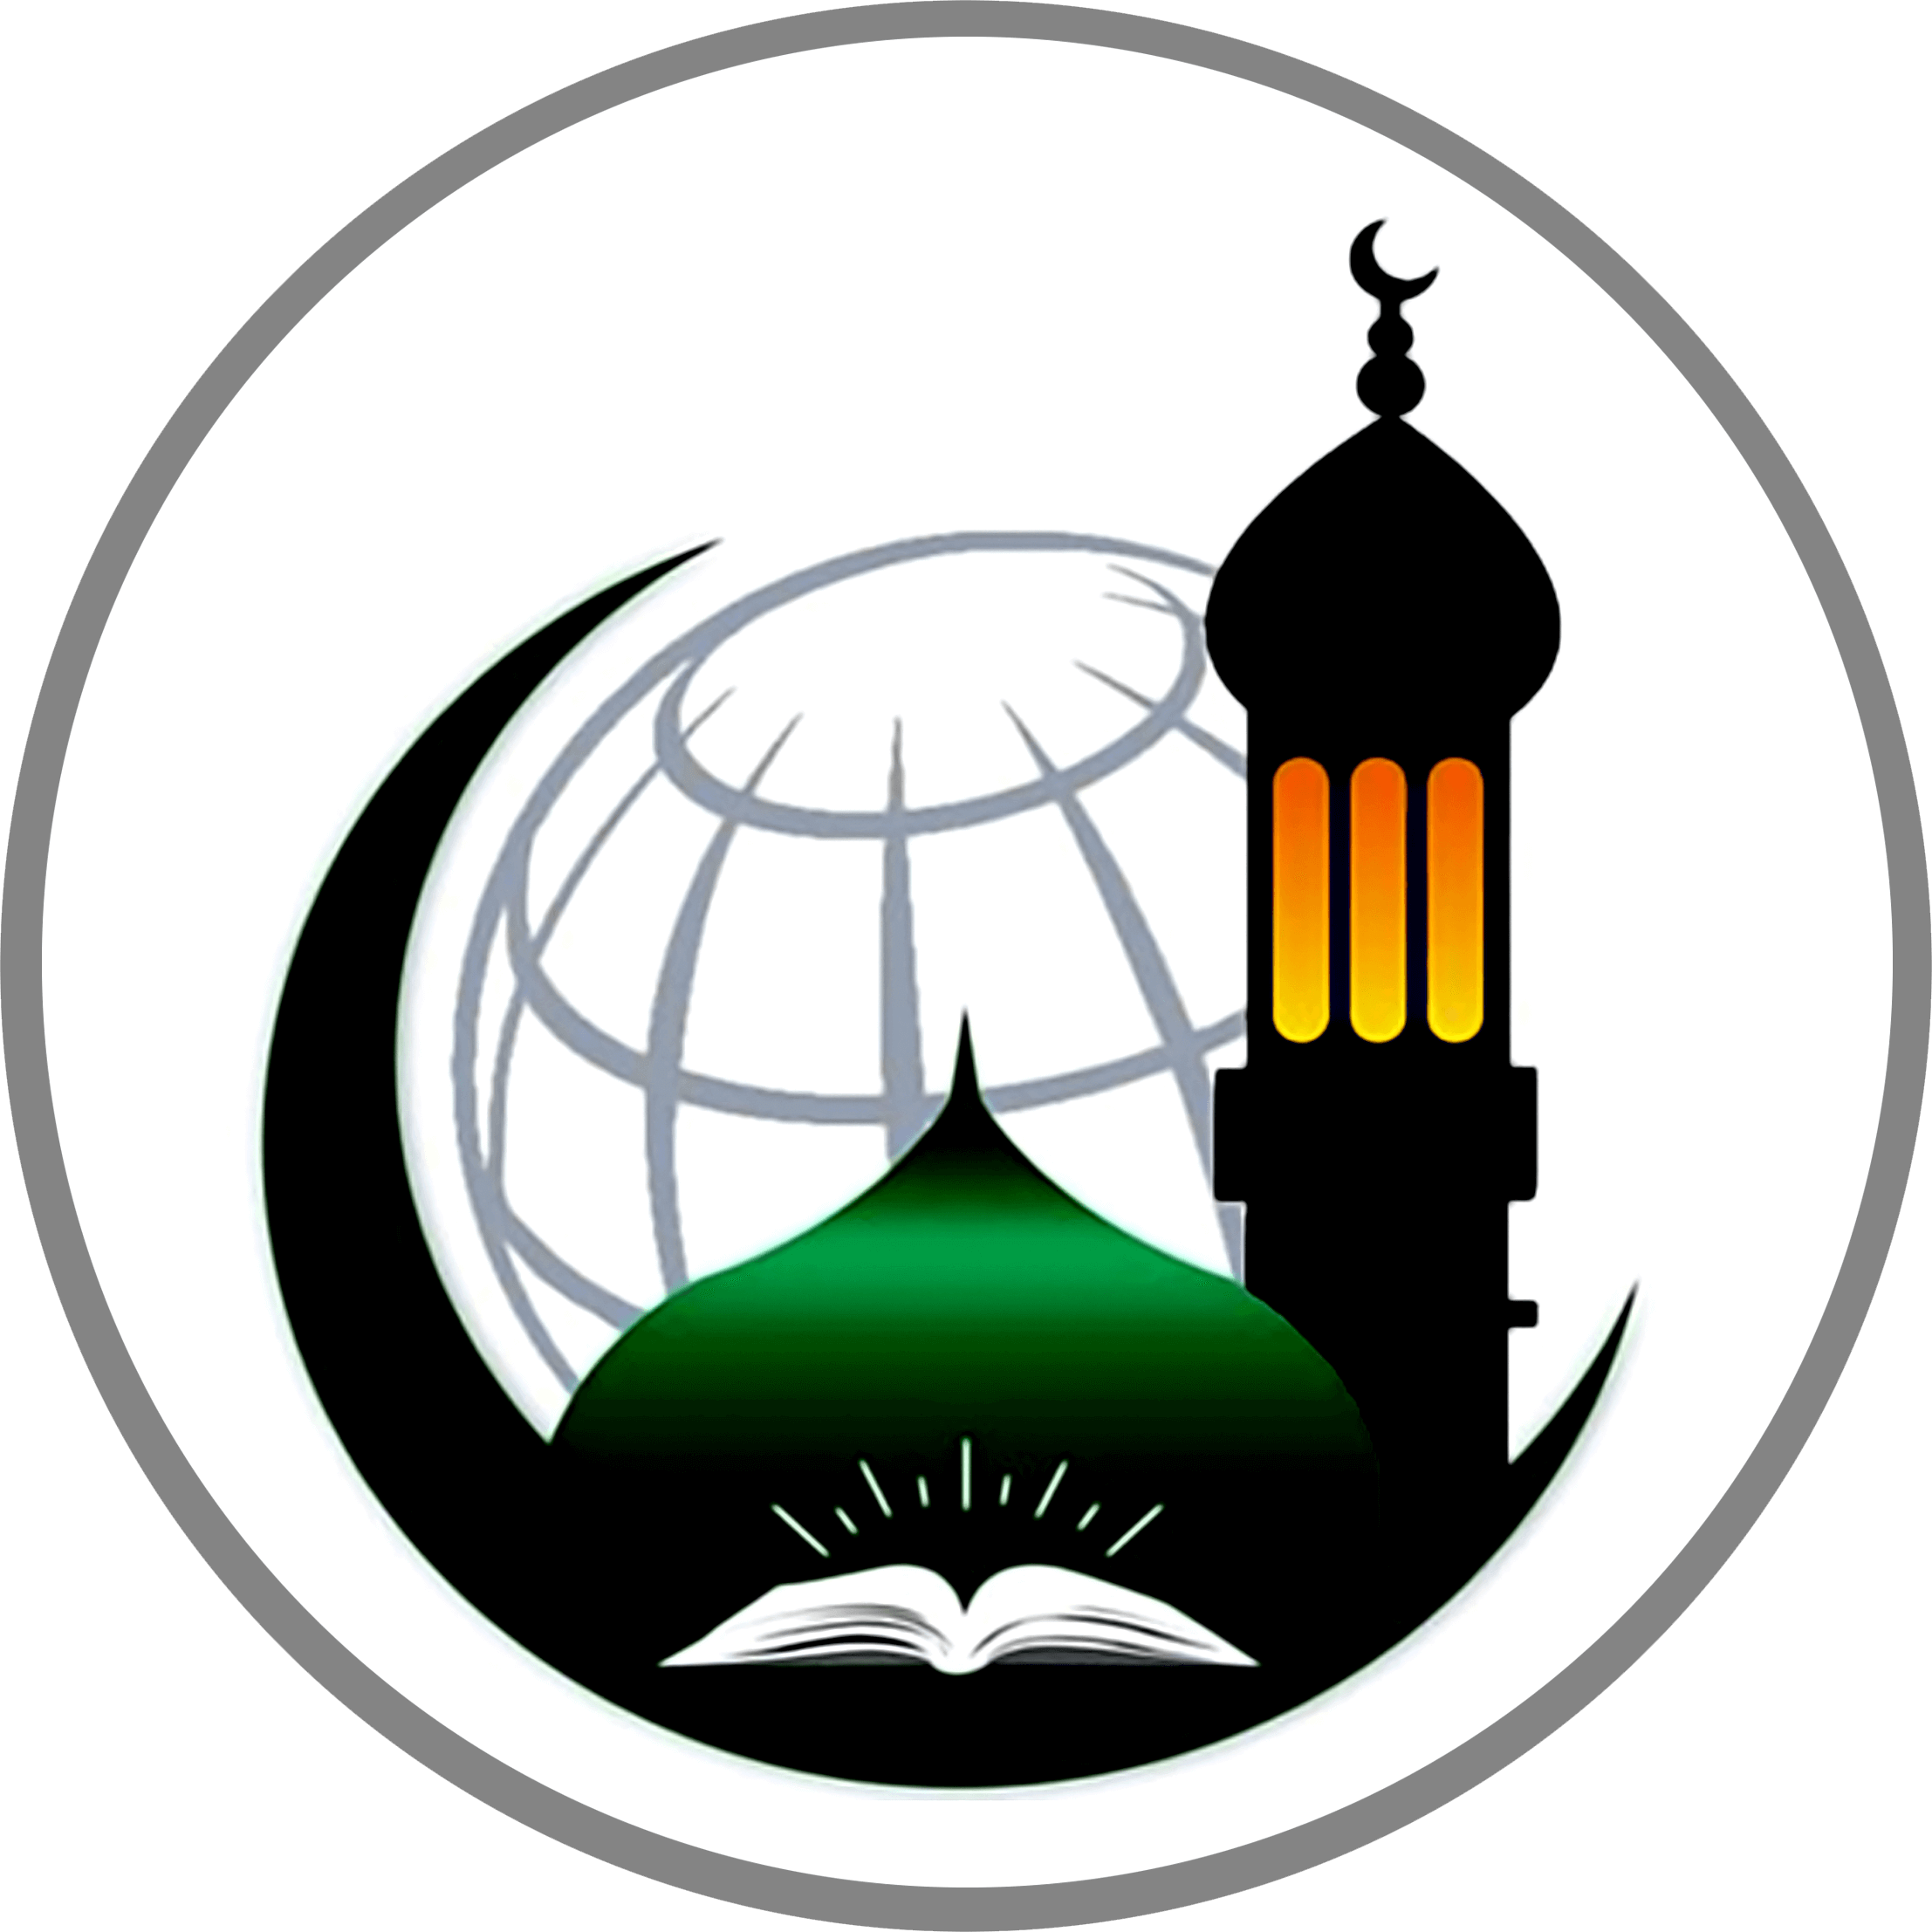 A Logo Of A Mosque And A Book